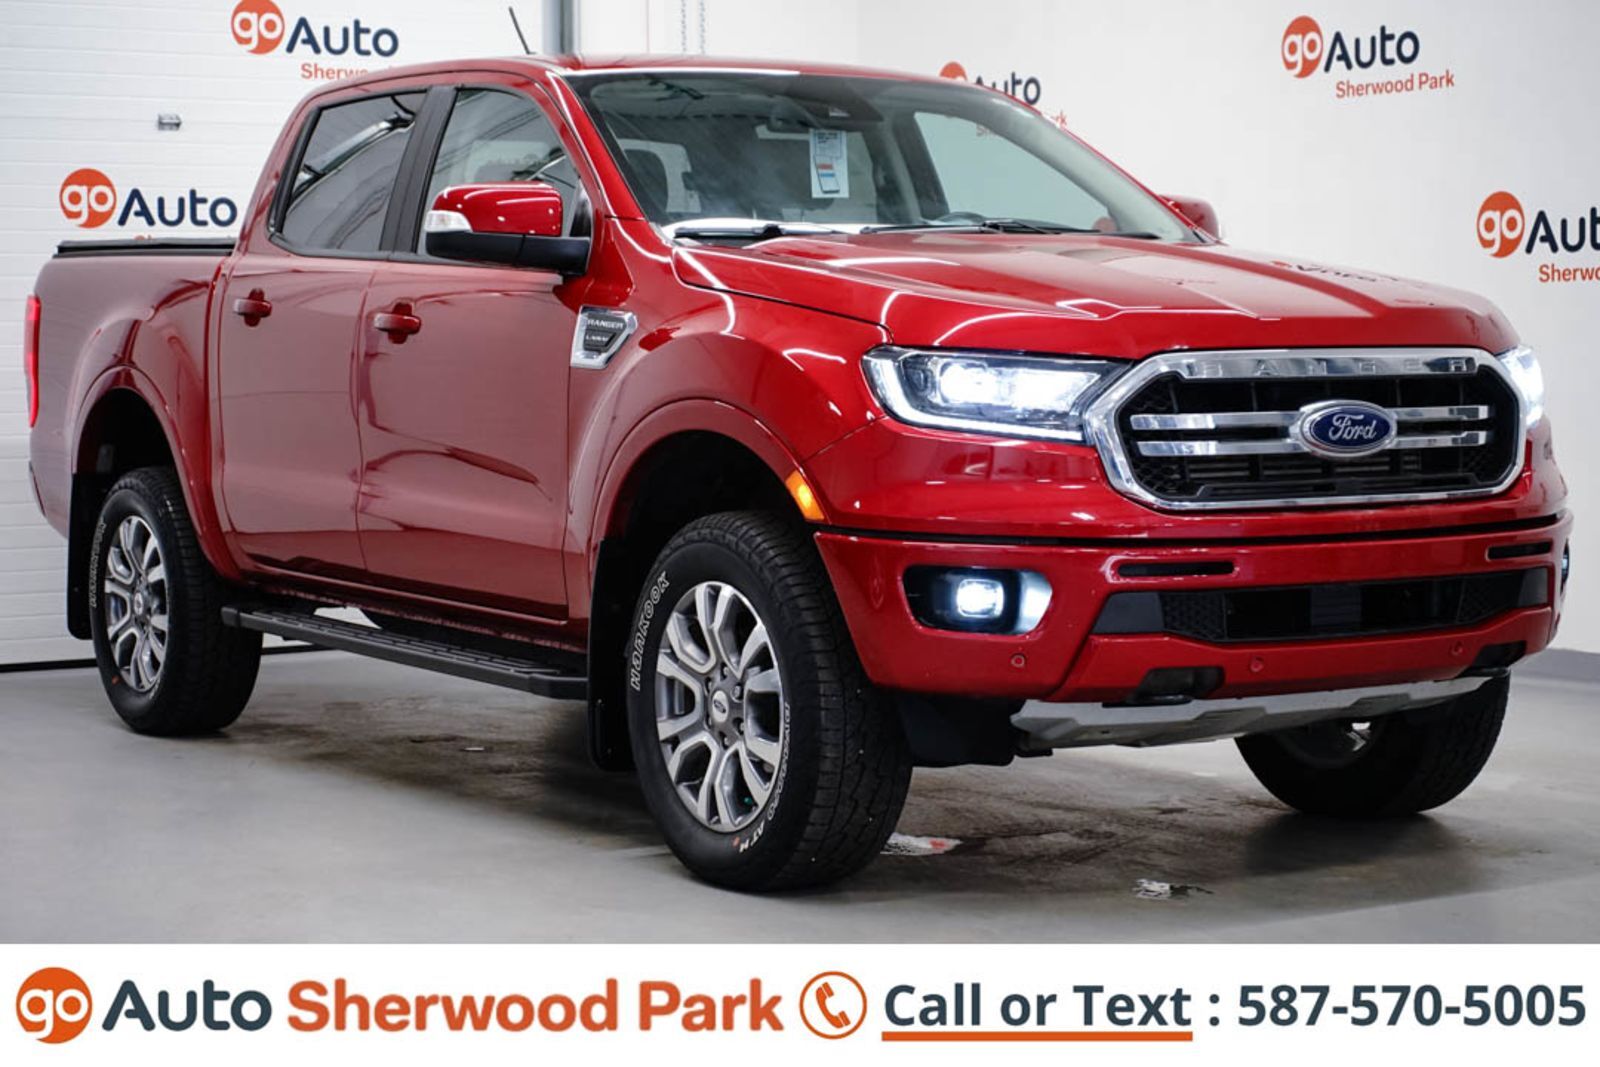 2021 Ford Ranger LARIAT  4WD with Navigation and SXM - Sherwood Park